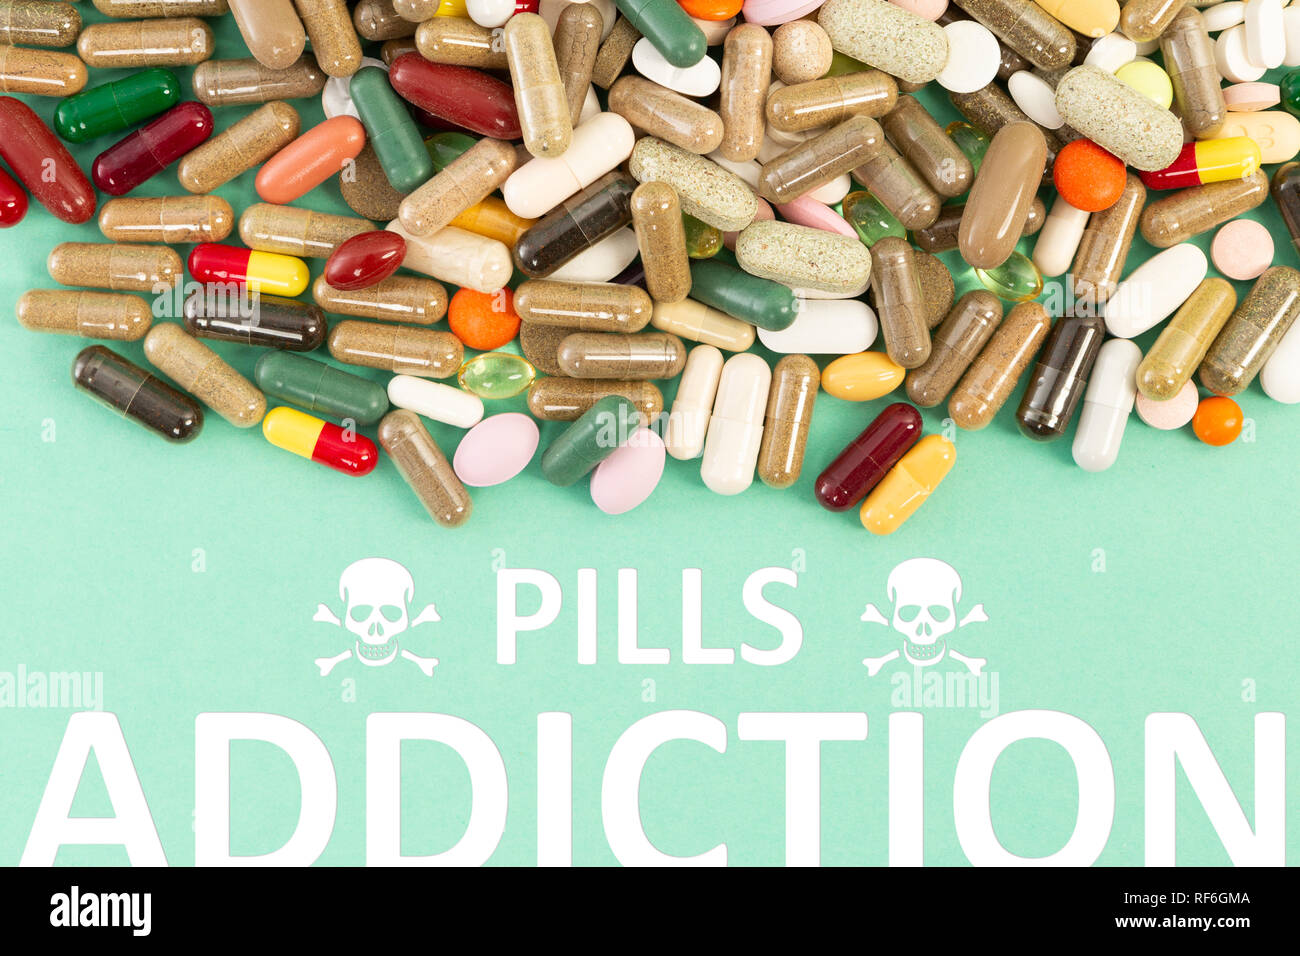 Pills addiction concept with various drugs and health hazard skull symbol Stock Photo